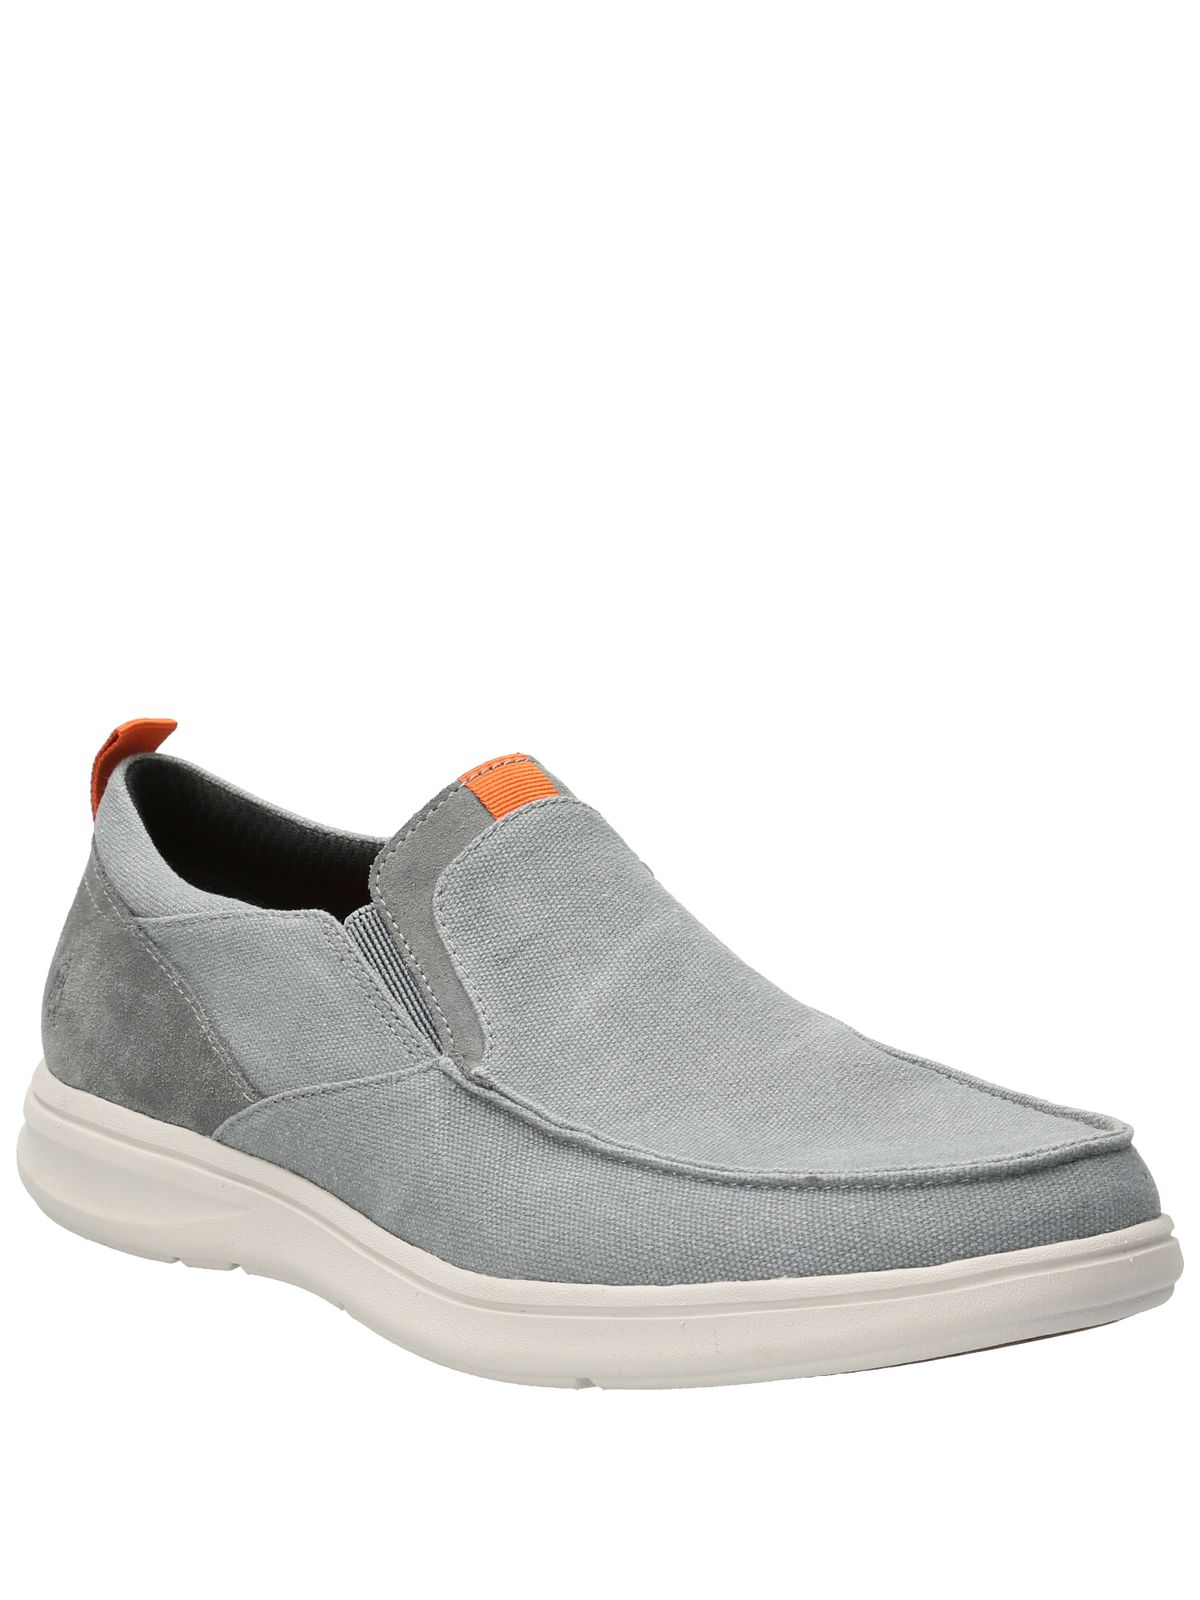 Slip On Hombre Bacco Gris